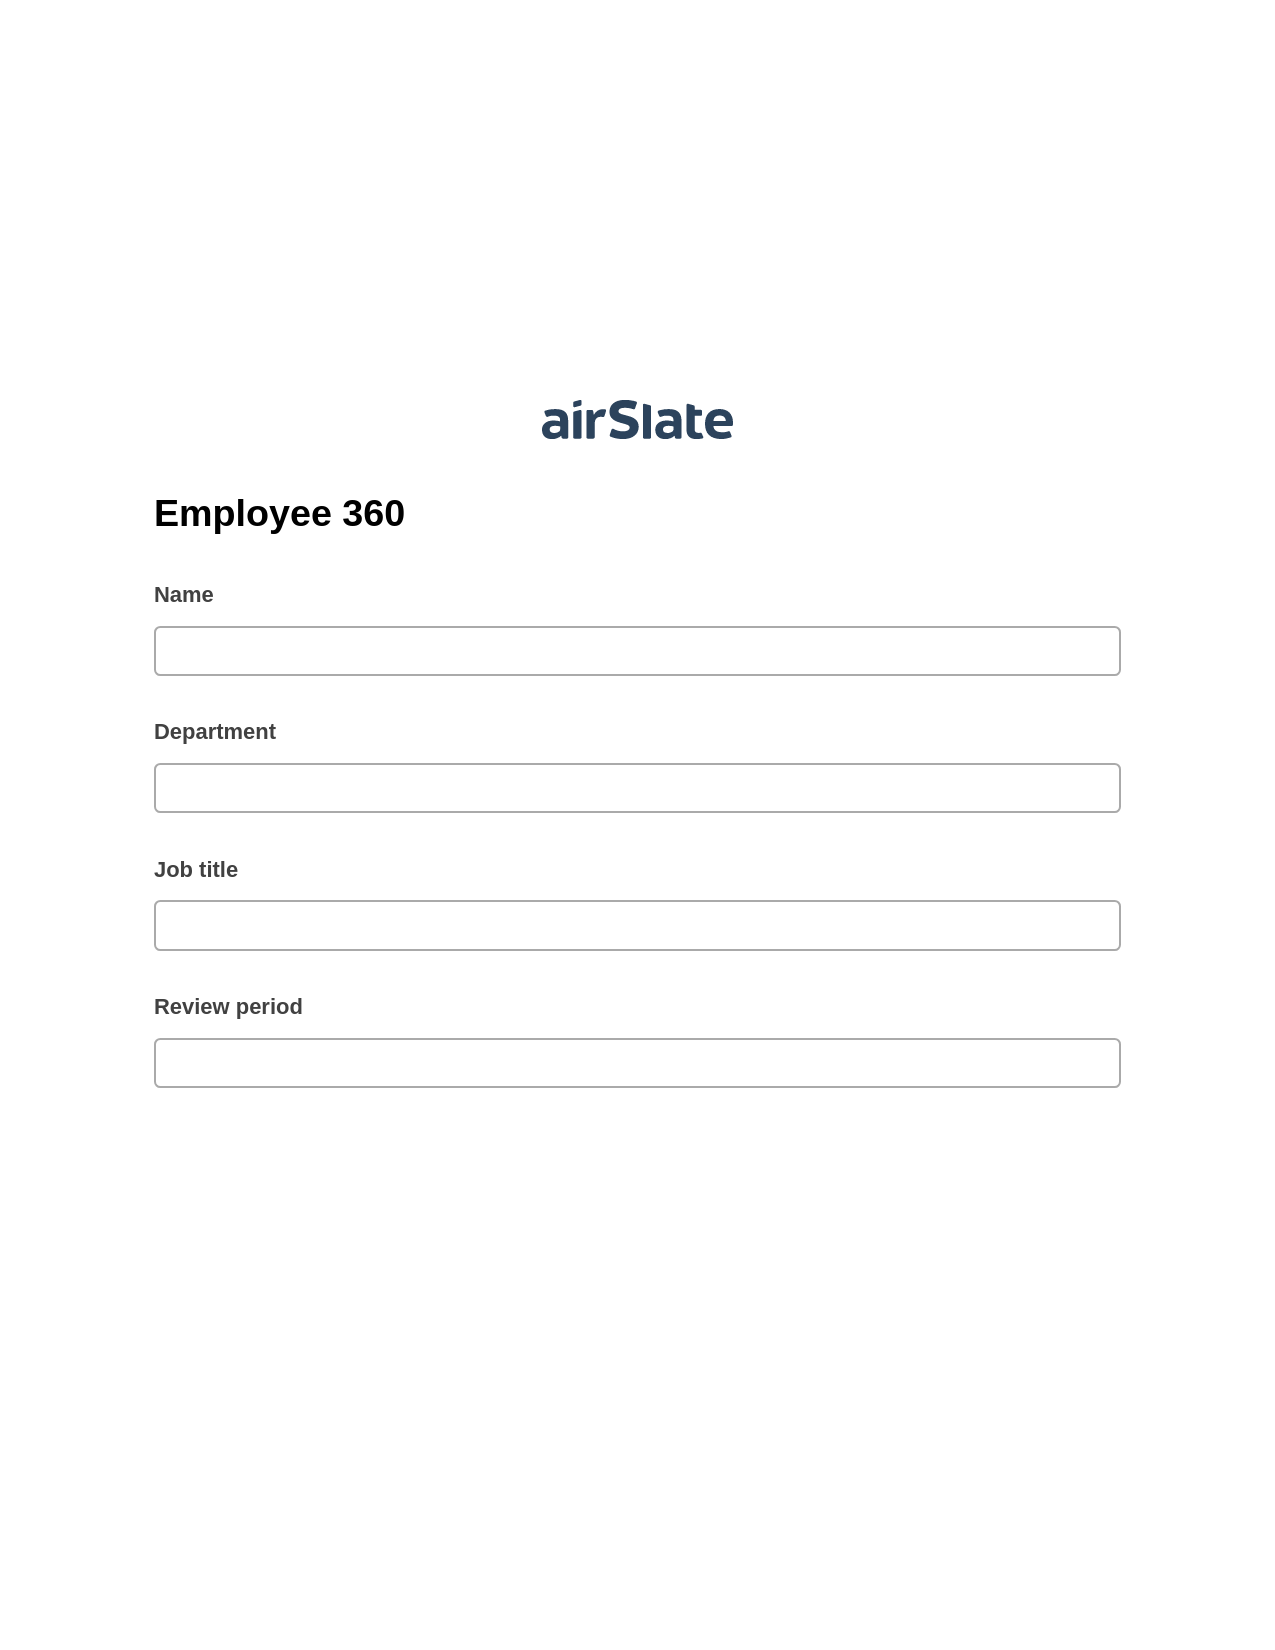 Multirole Employee 360 Pre-fill Dropdowns from Google Sheet Bot, Update MS Dynamics 365 Record Bot, Archive to SharePoint Folder Bot